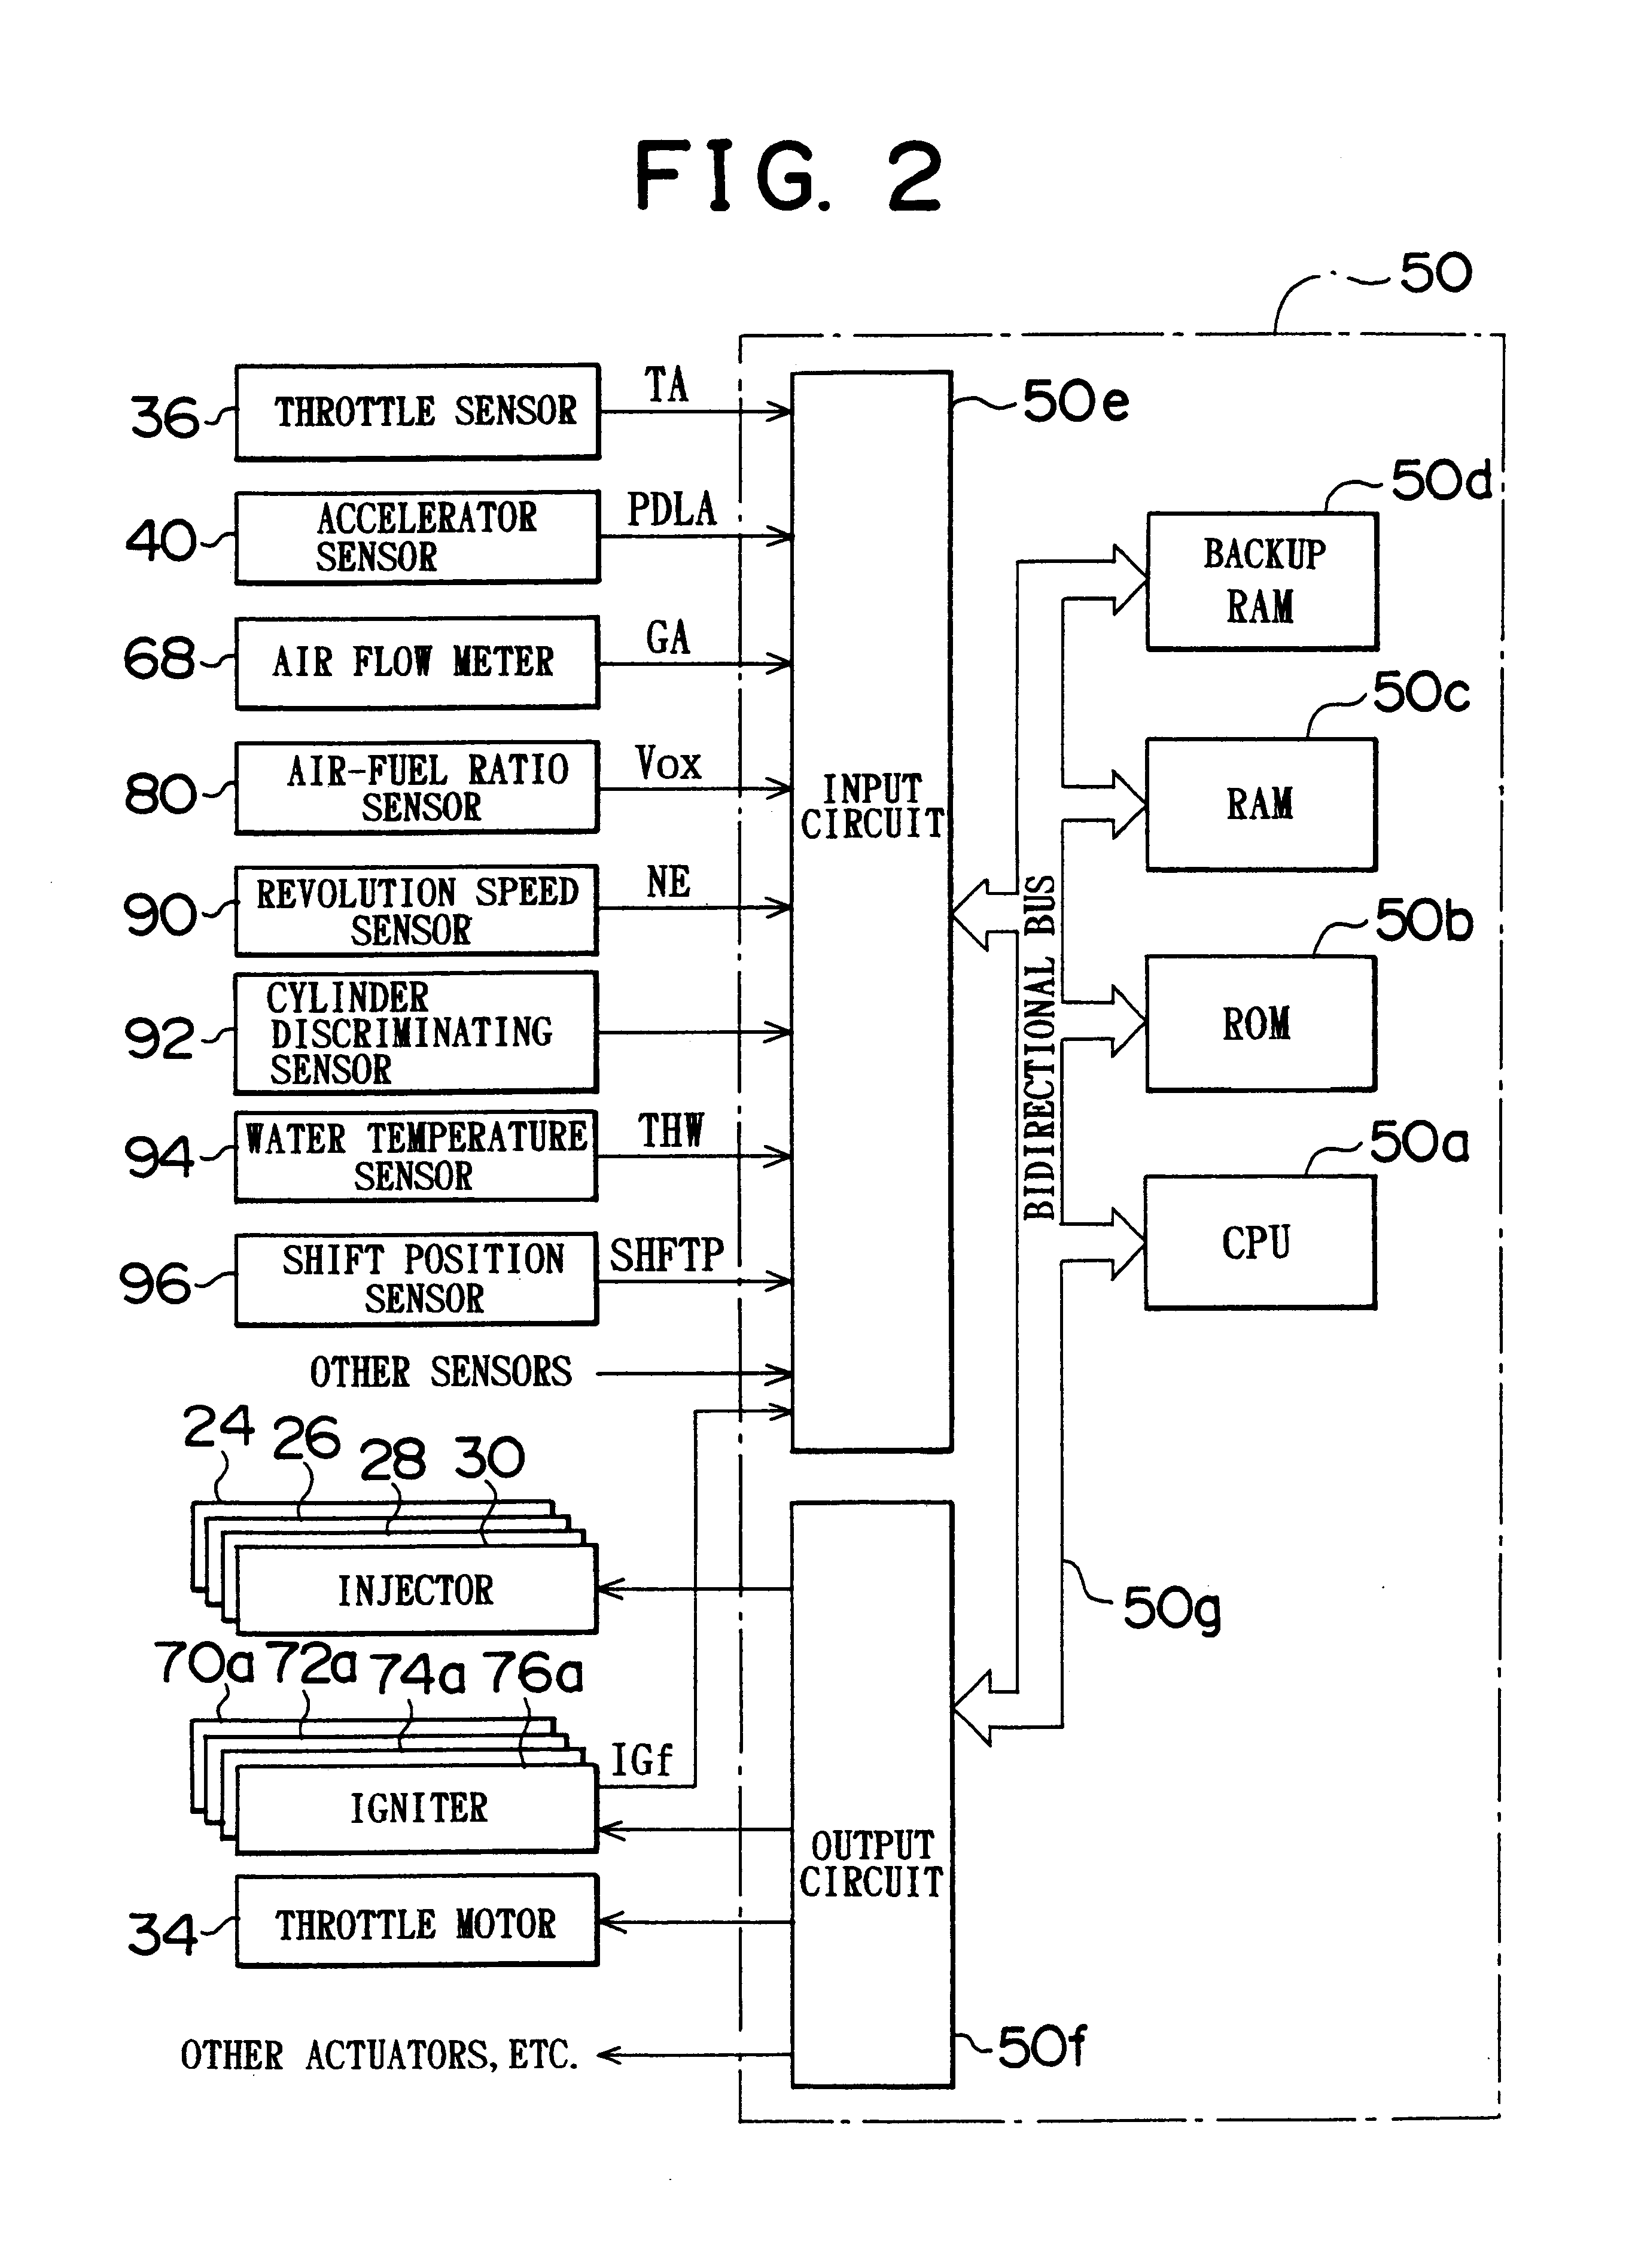 Air-fuel ratio control apparatus and method for internal combustion engine